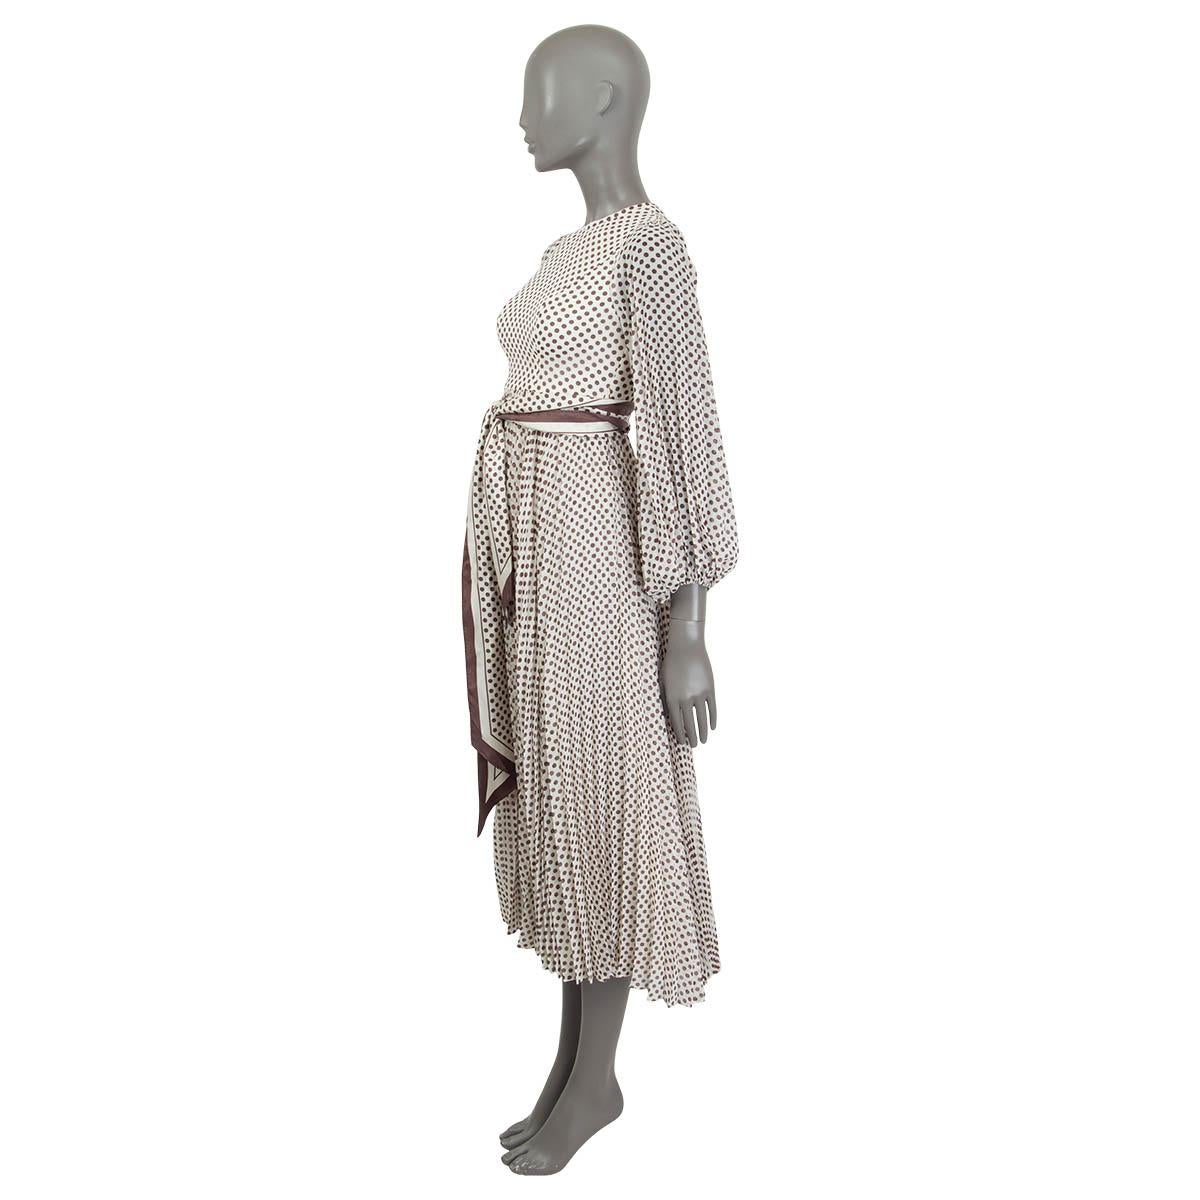 100% authentic Zimmermann Sunray belted long sleeve midi dress in off-white and brown polyester chiffon (100%). Features a detachable self-tie silk belt and a polka dot print. Opens with a zipper at the back. Lined in off-white viscose (100%). Has